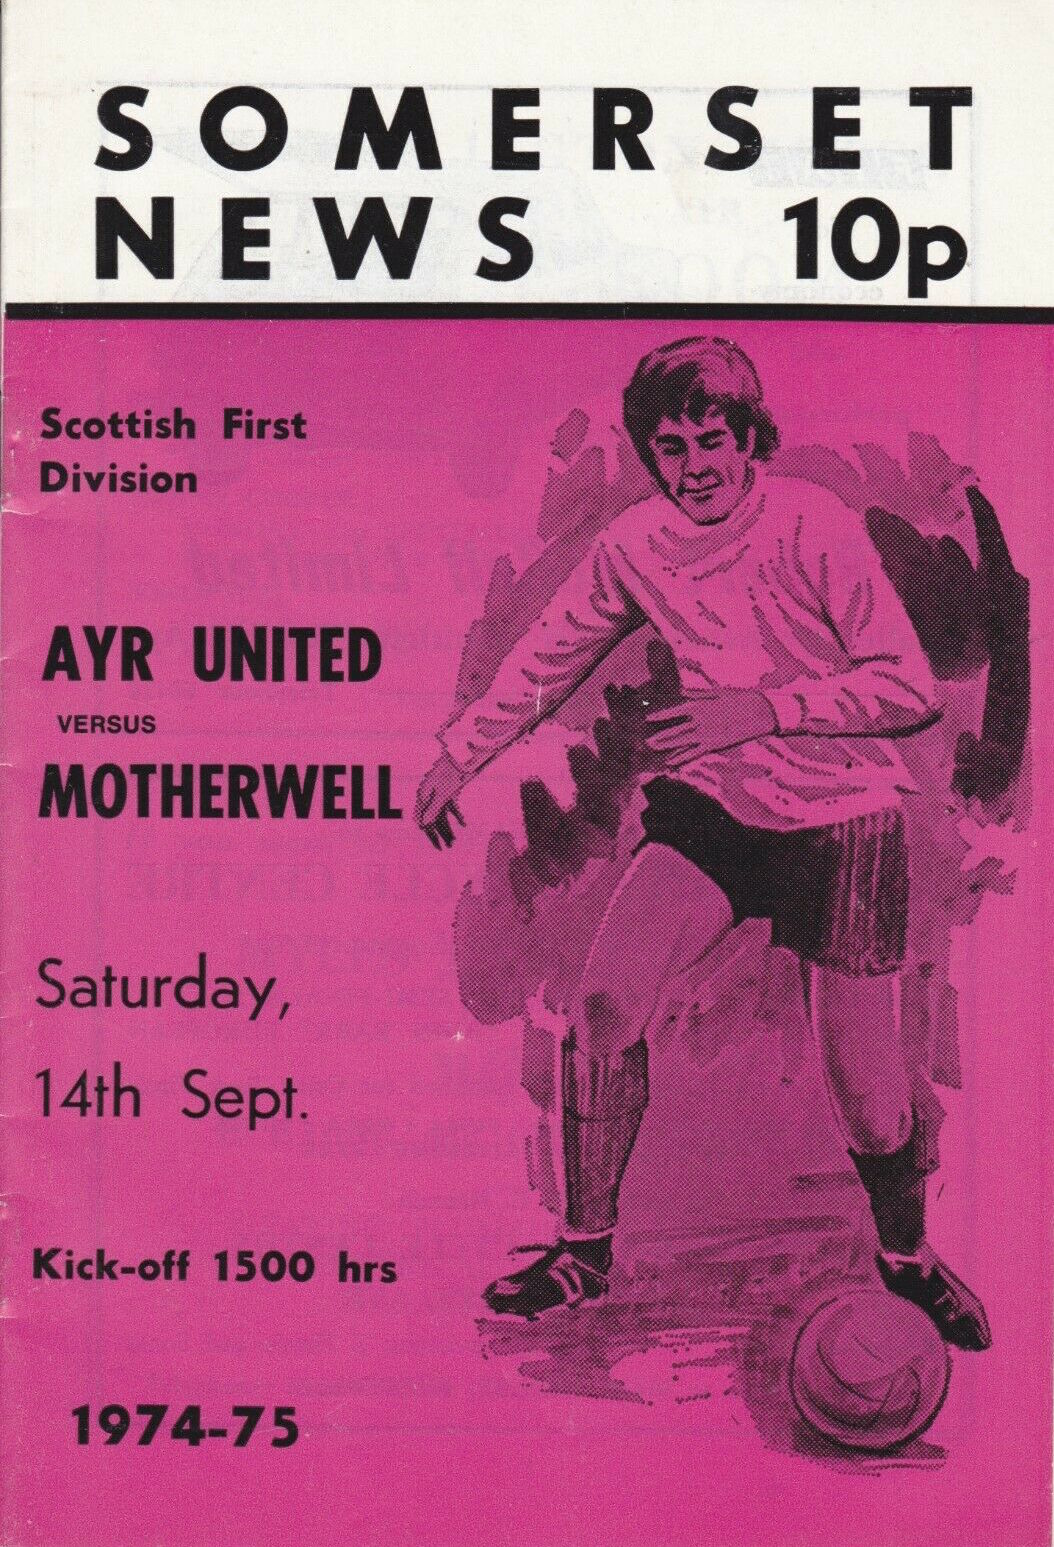 versus Ayr United Programme Cover